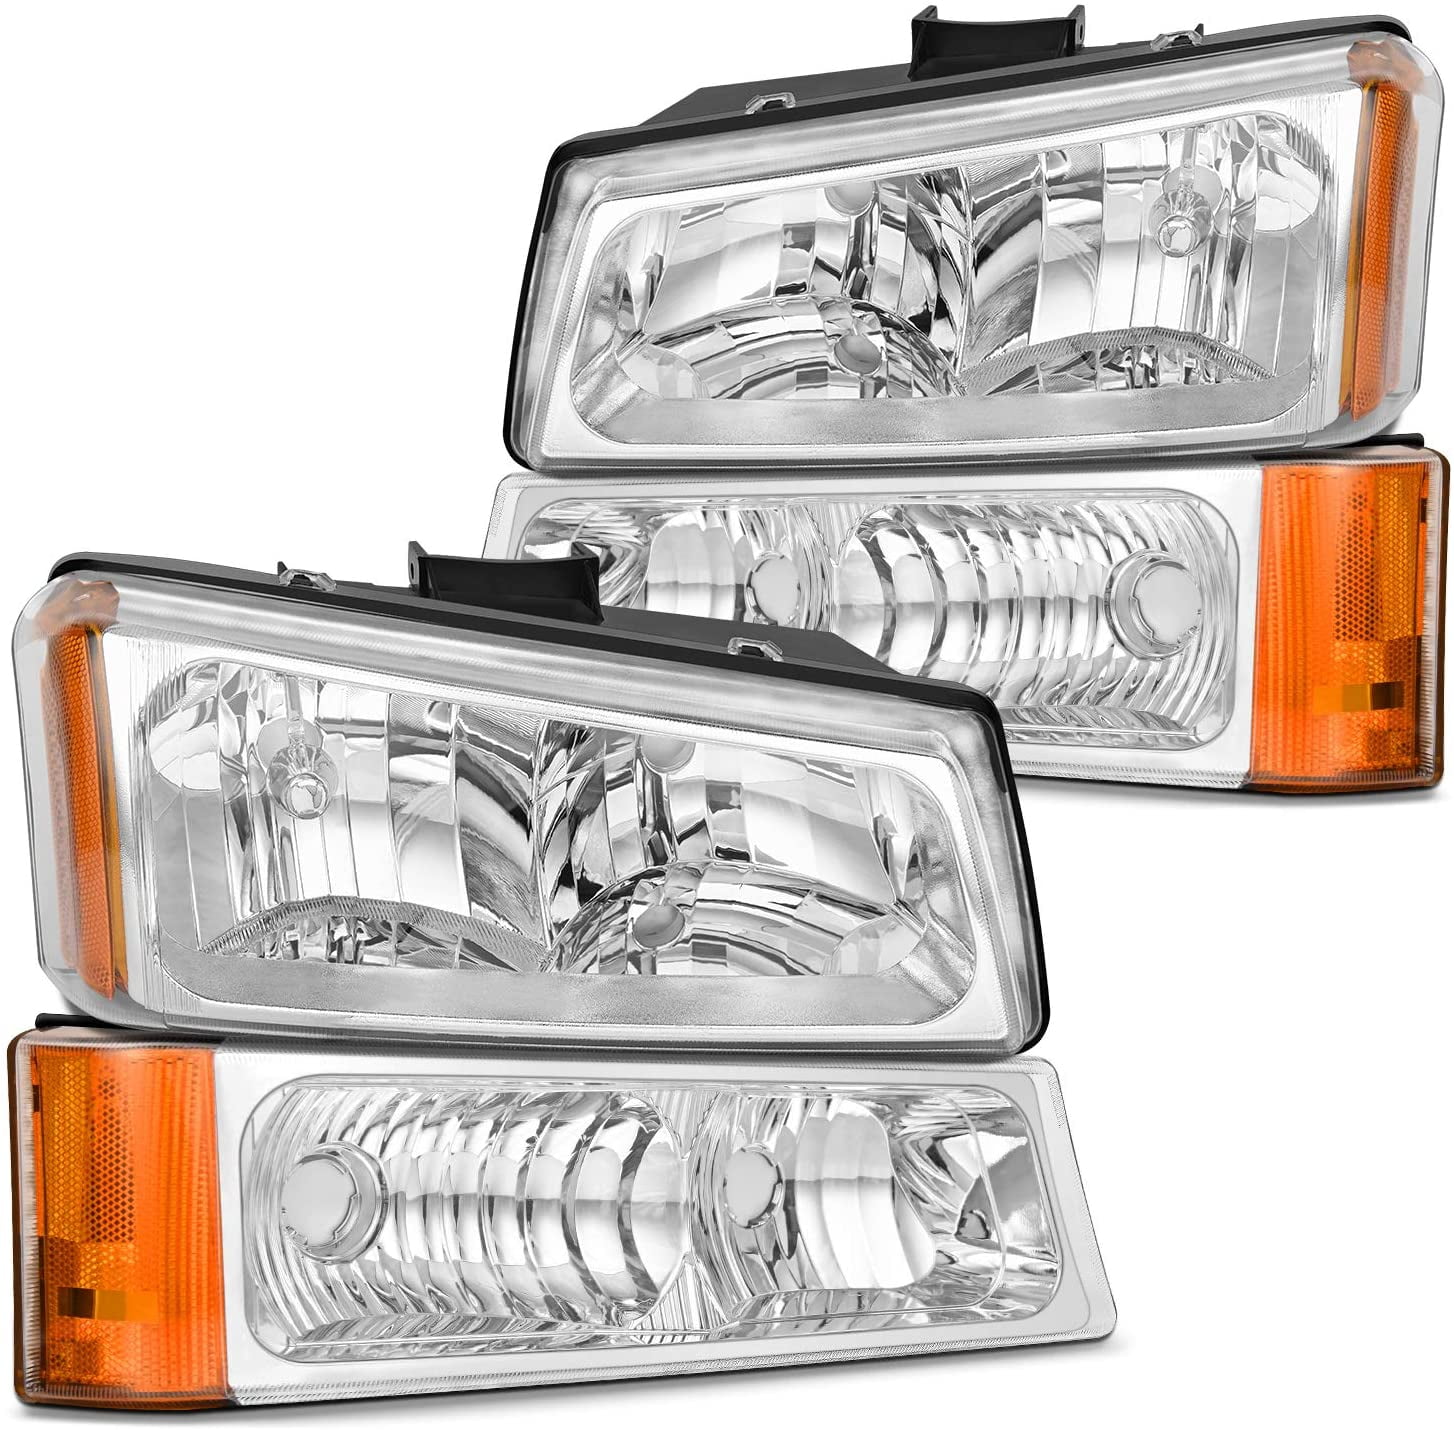 Chrome Housing Clear Lens Amber Reflector AJP Distributors Headlights Head Lights Lamps Assembly Pair Left Right 2003 2004 2005 2006 2007 03 04 05 06 07 For Chevy Silverado 1500 2500 3500 Avalanche 